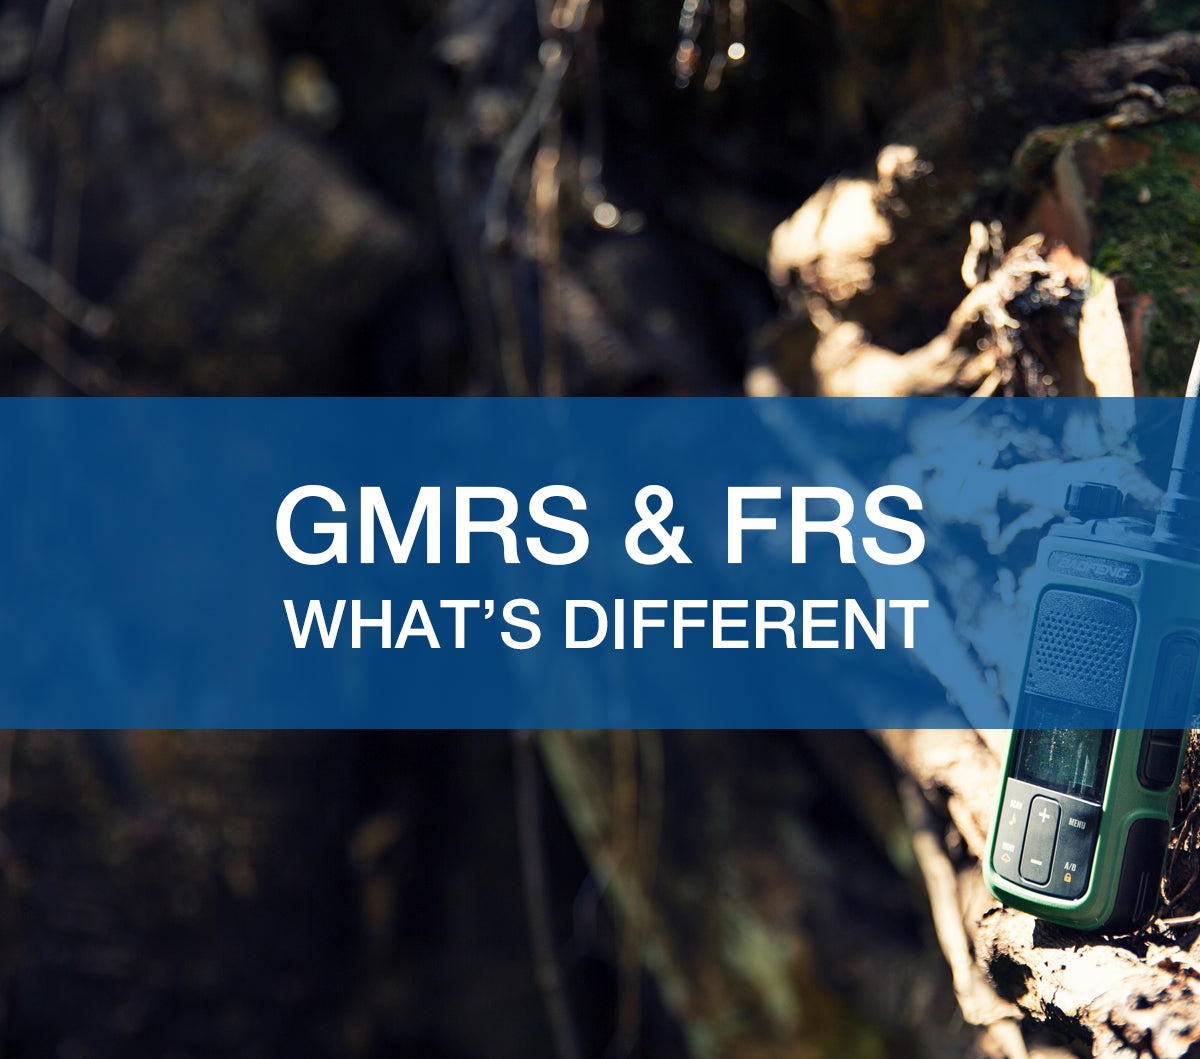 GMRS and FRS, what’s different? Baofeng